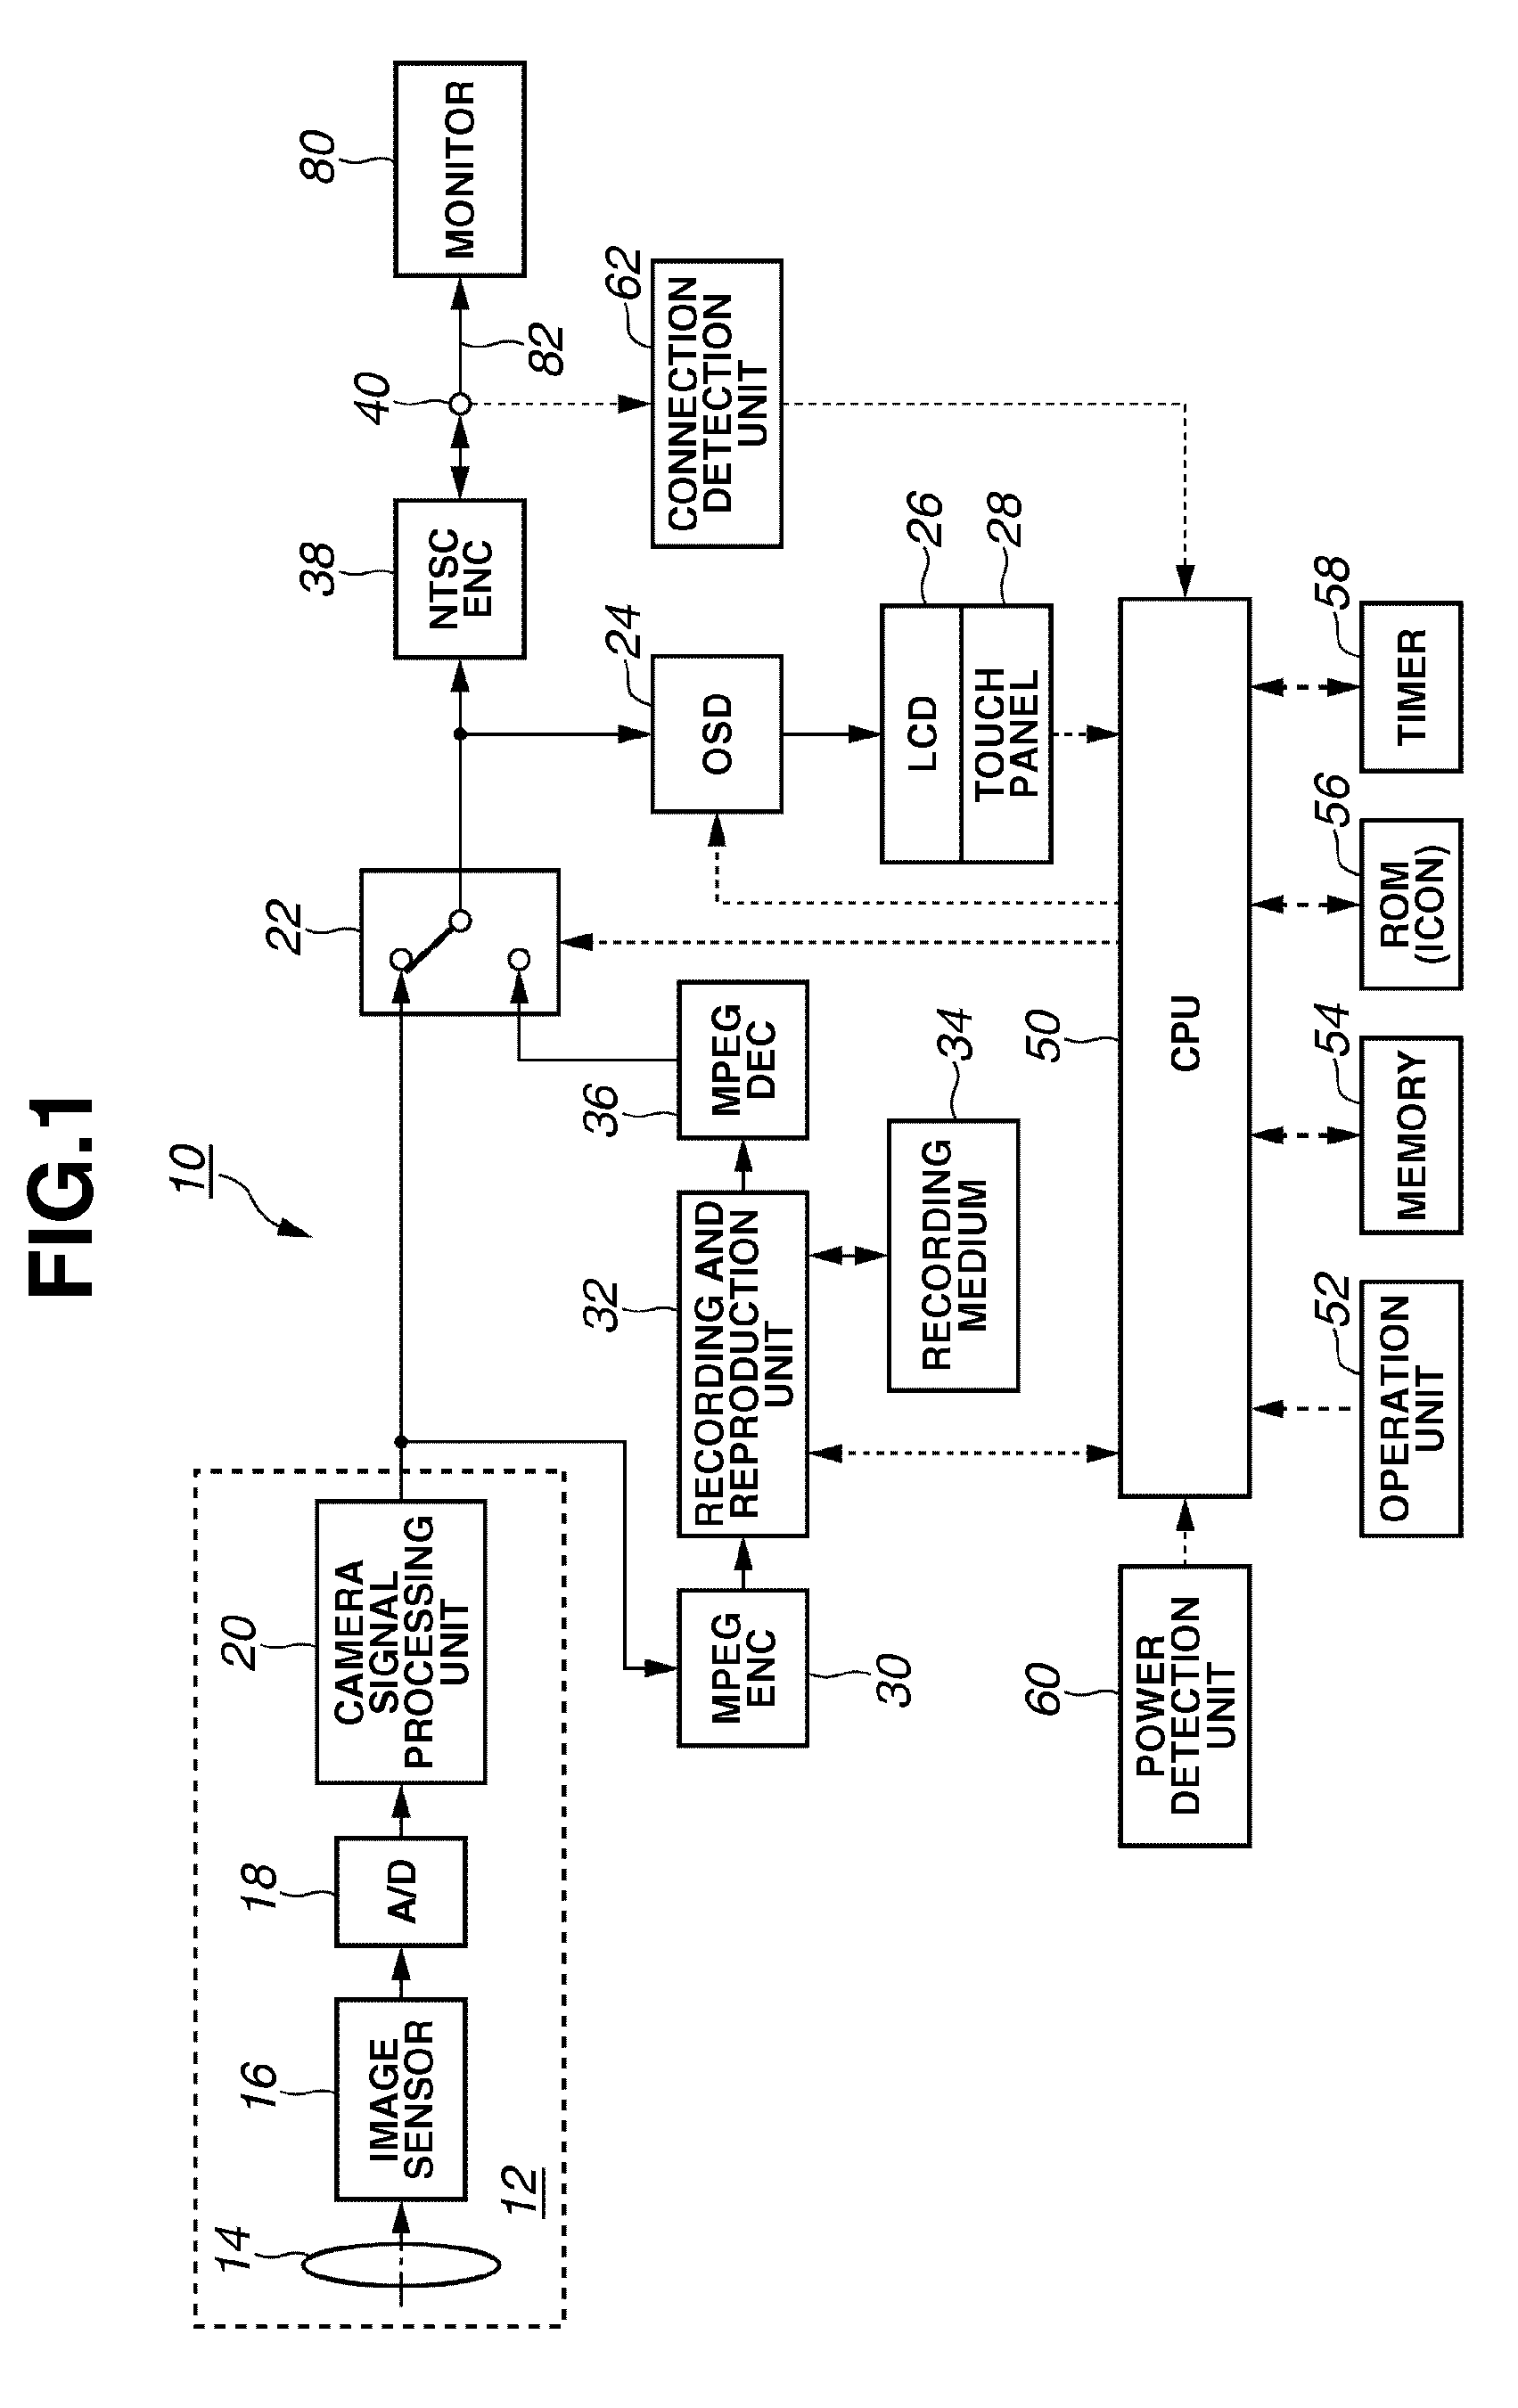 Image reproducing apparatus and control method